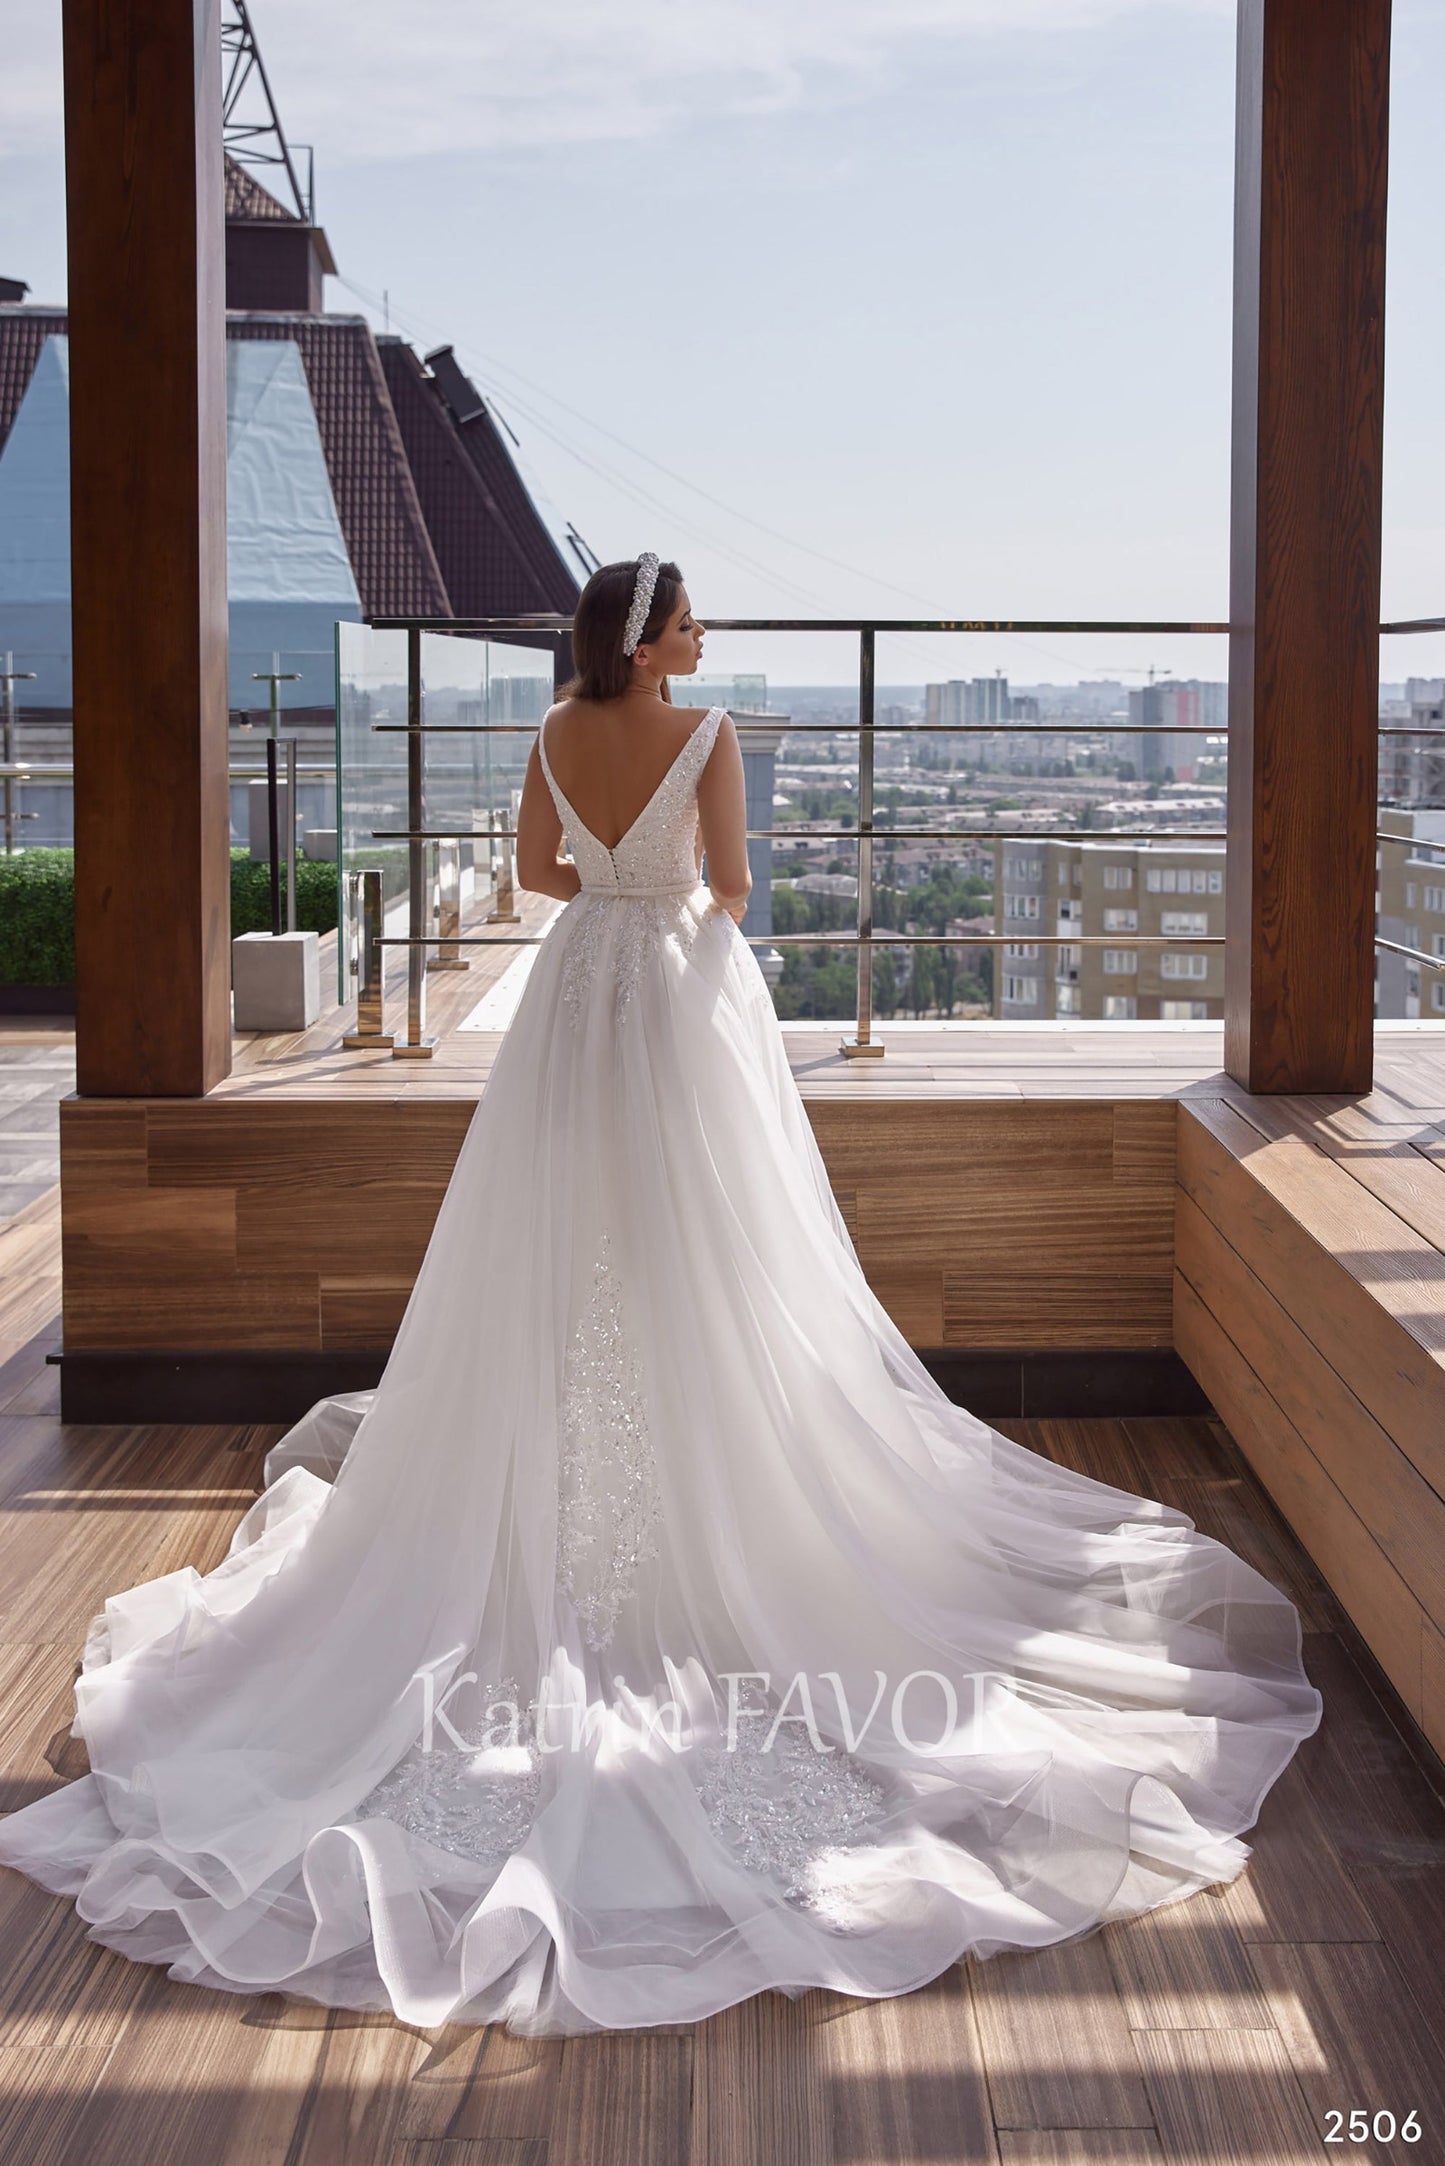 KatrinFAVORboutique-2 in 1 tulle a line beach wedding dress